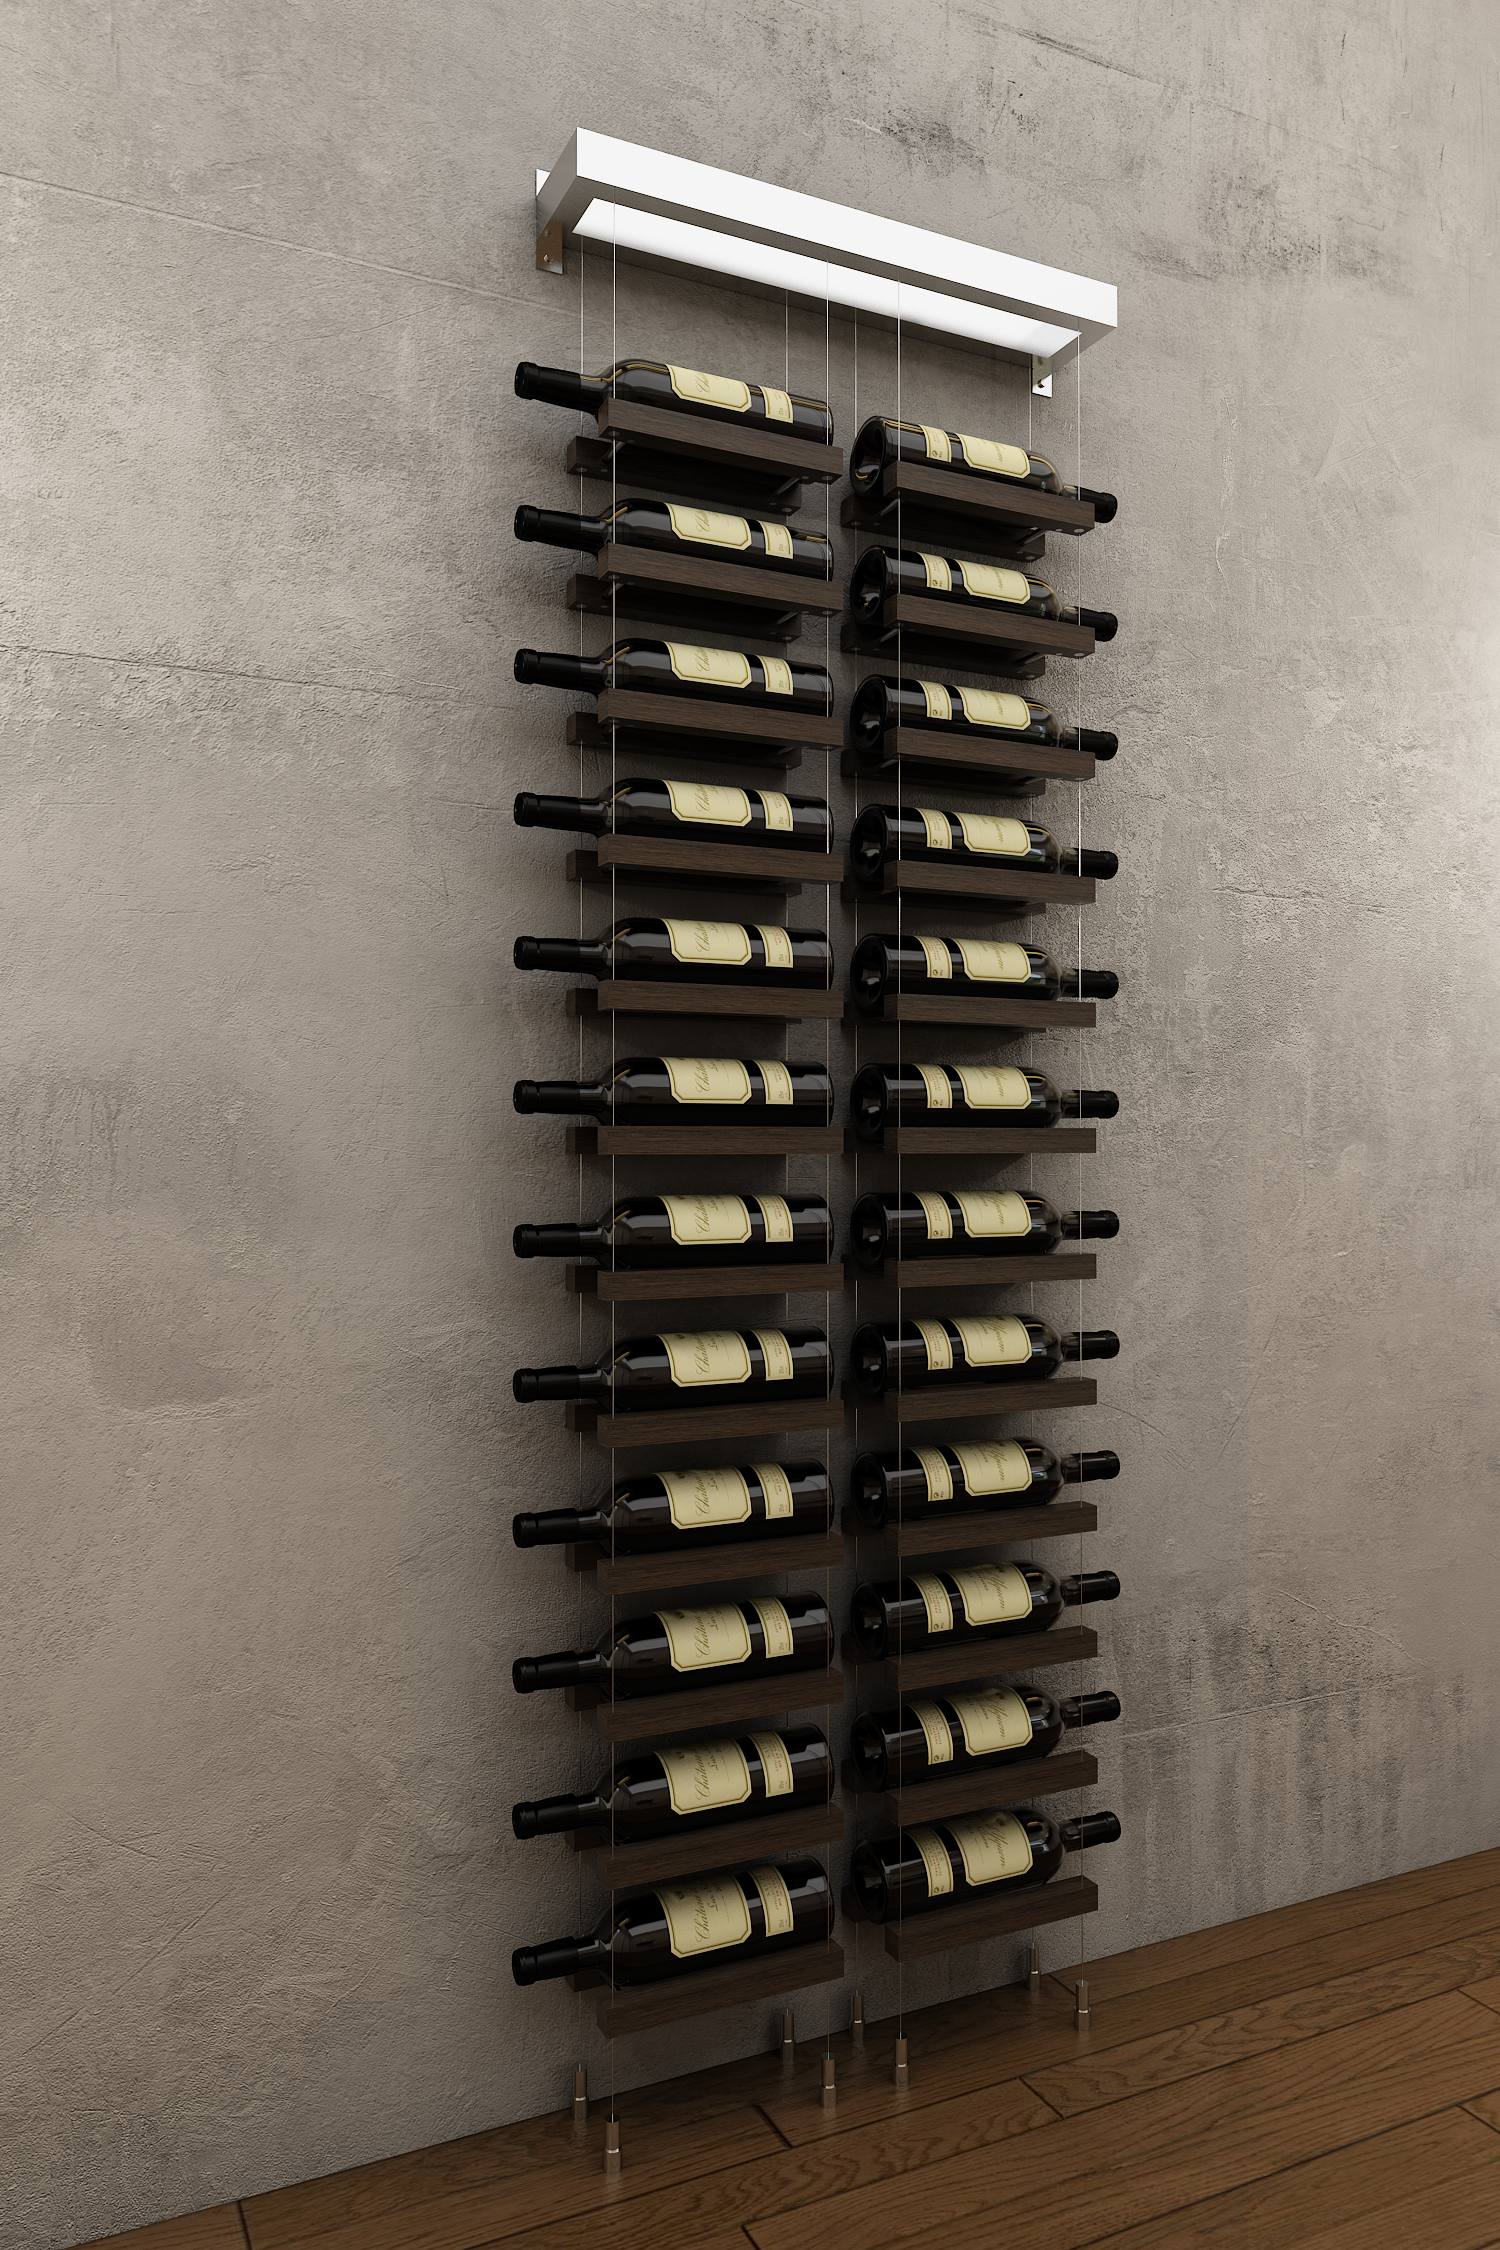 24 bottles double column one bottle deep wall mounted BUOYANT® cable wine rack (chrome hardware)